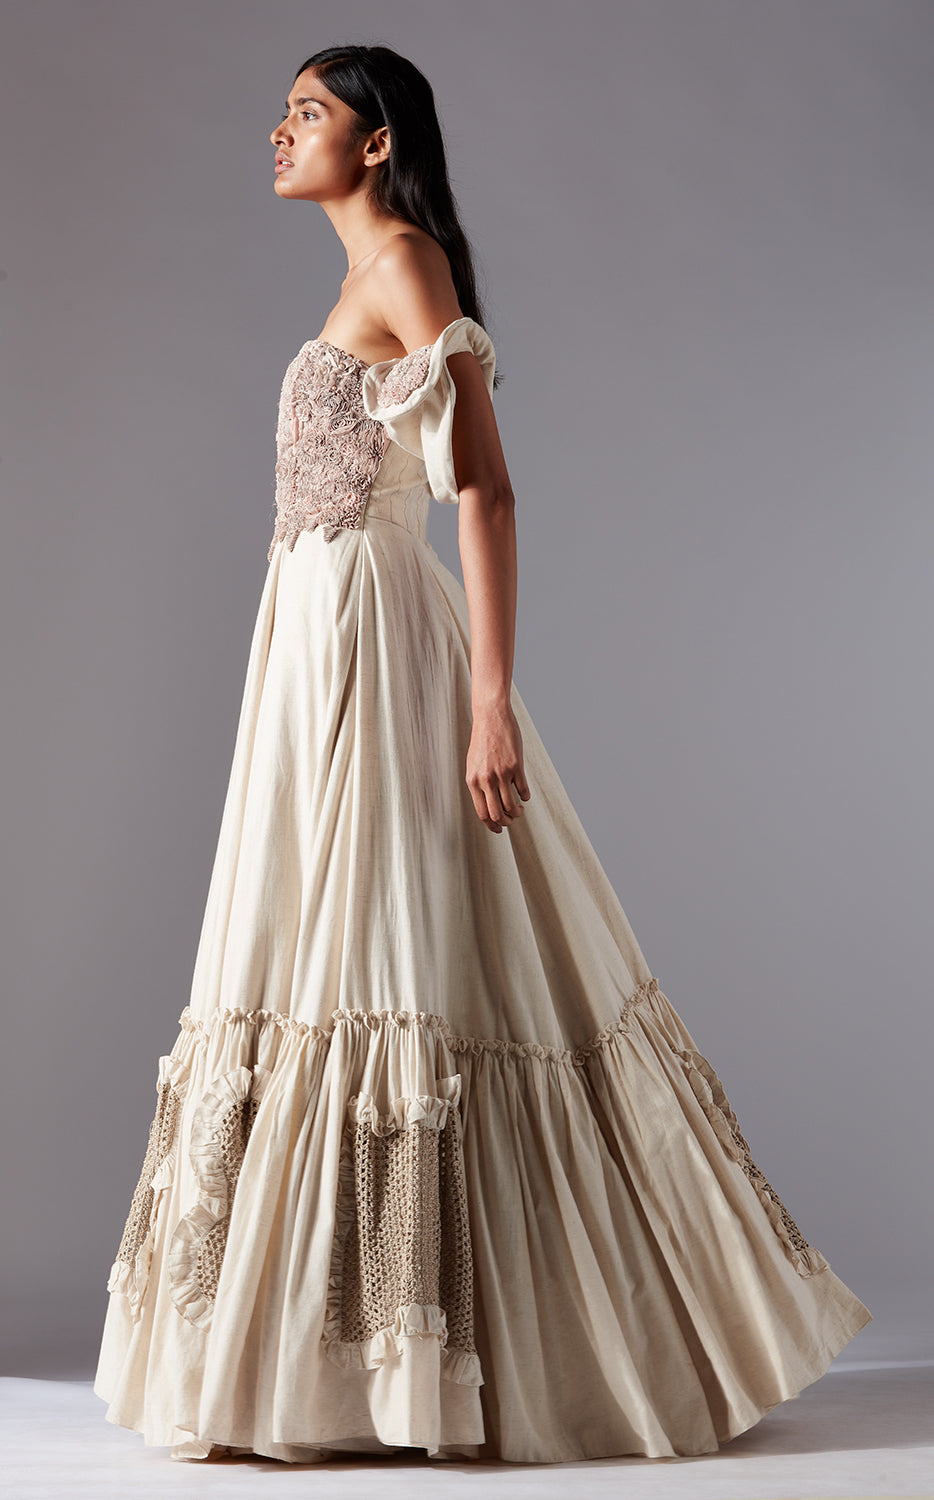 Arabesque Floating Gown